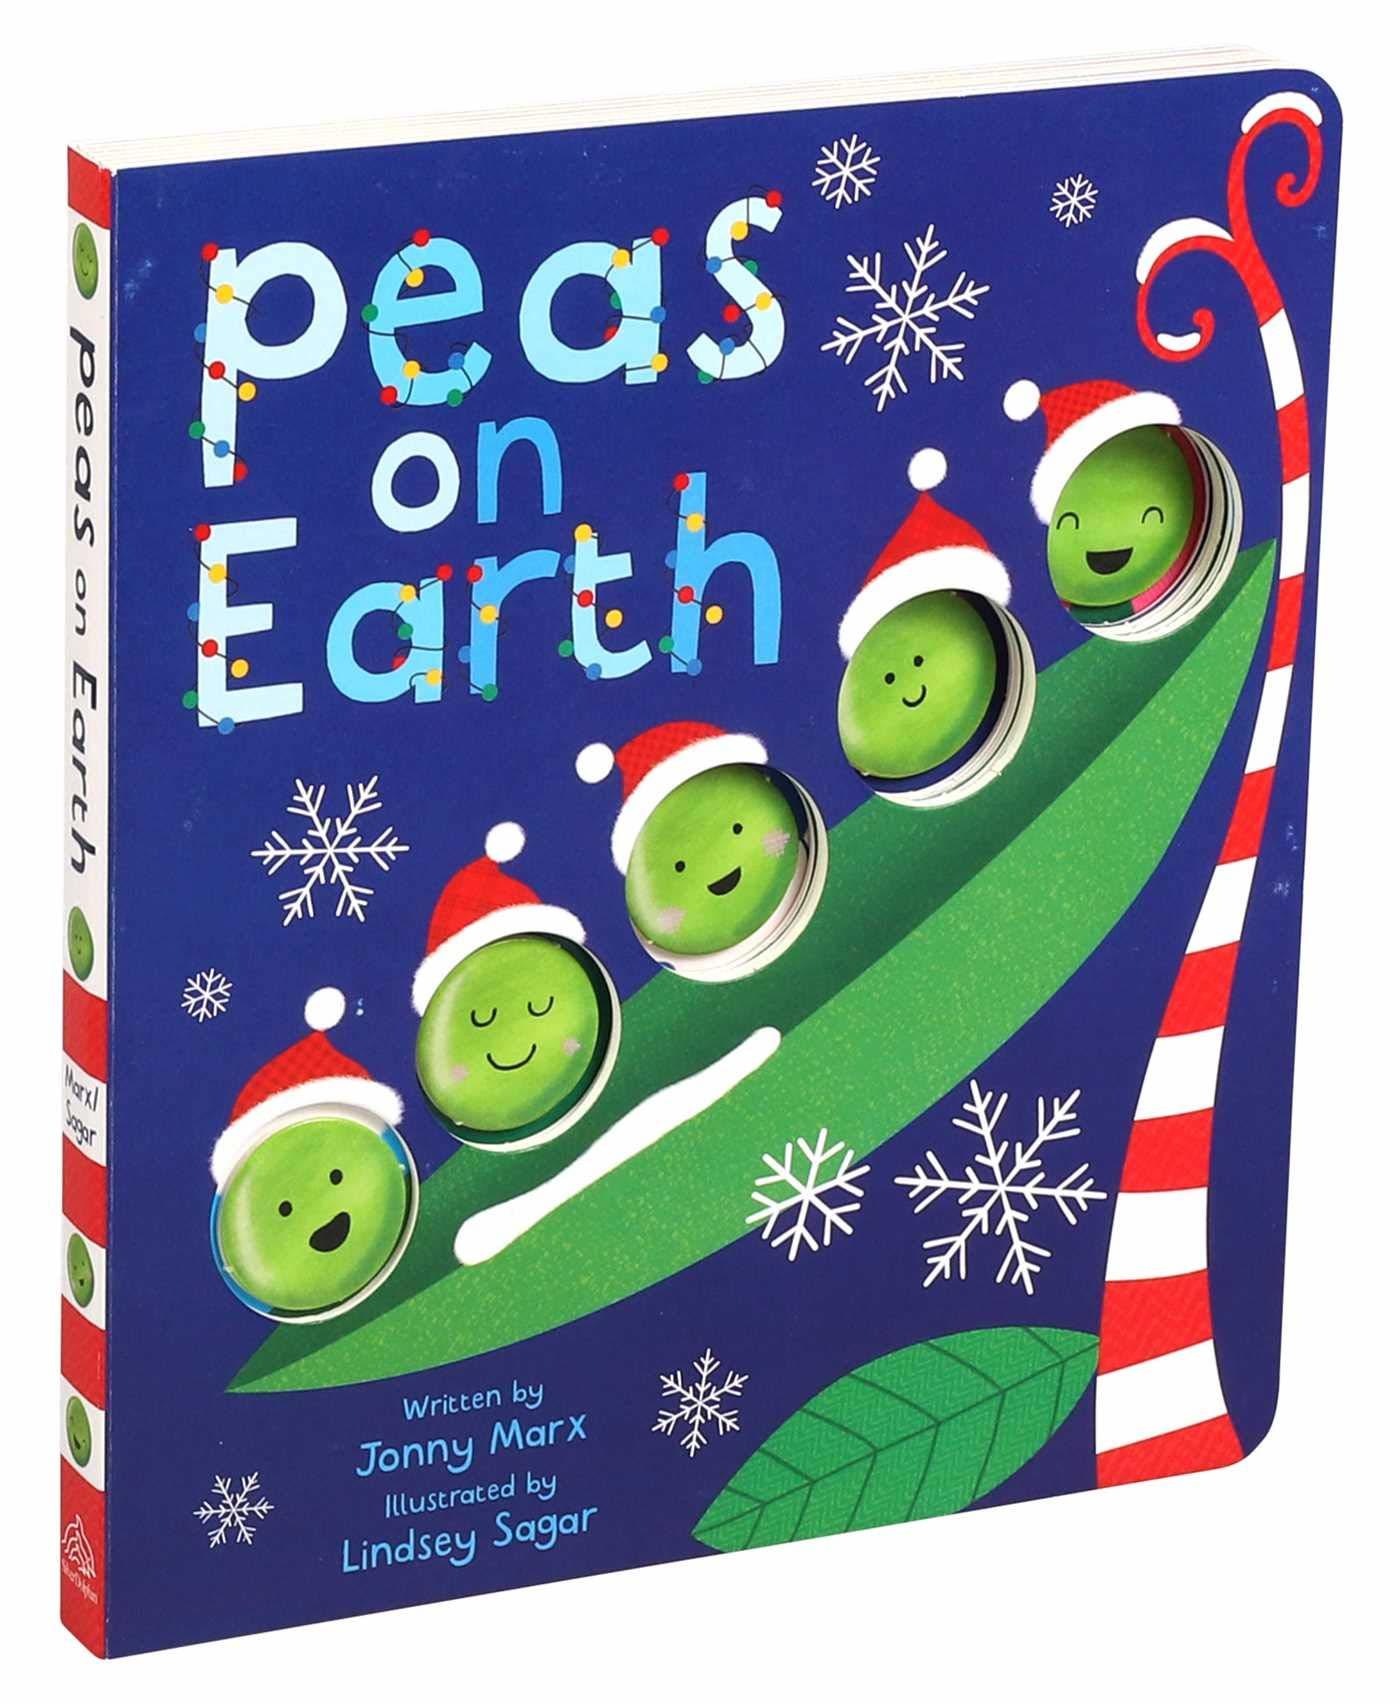 Blue square board book with 5 peas on the front. Text reads ' Peas on Earth'.